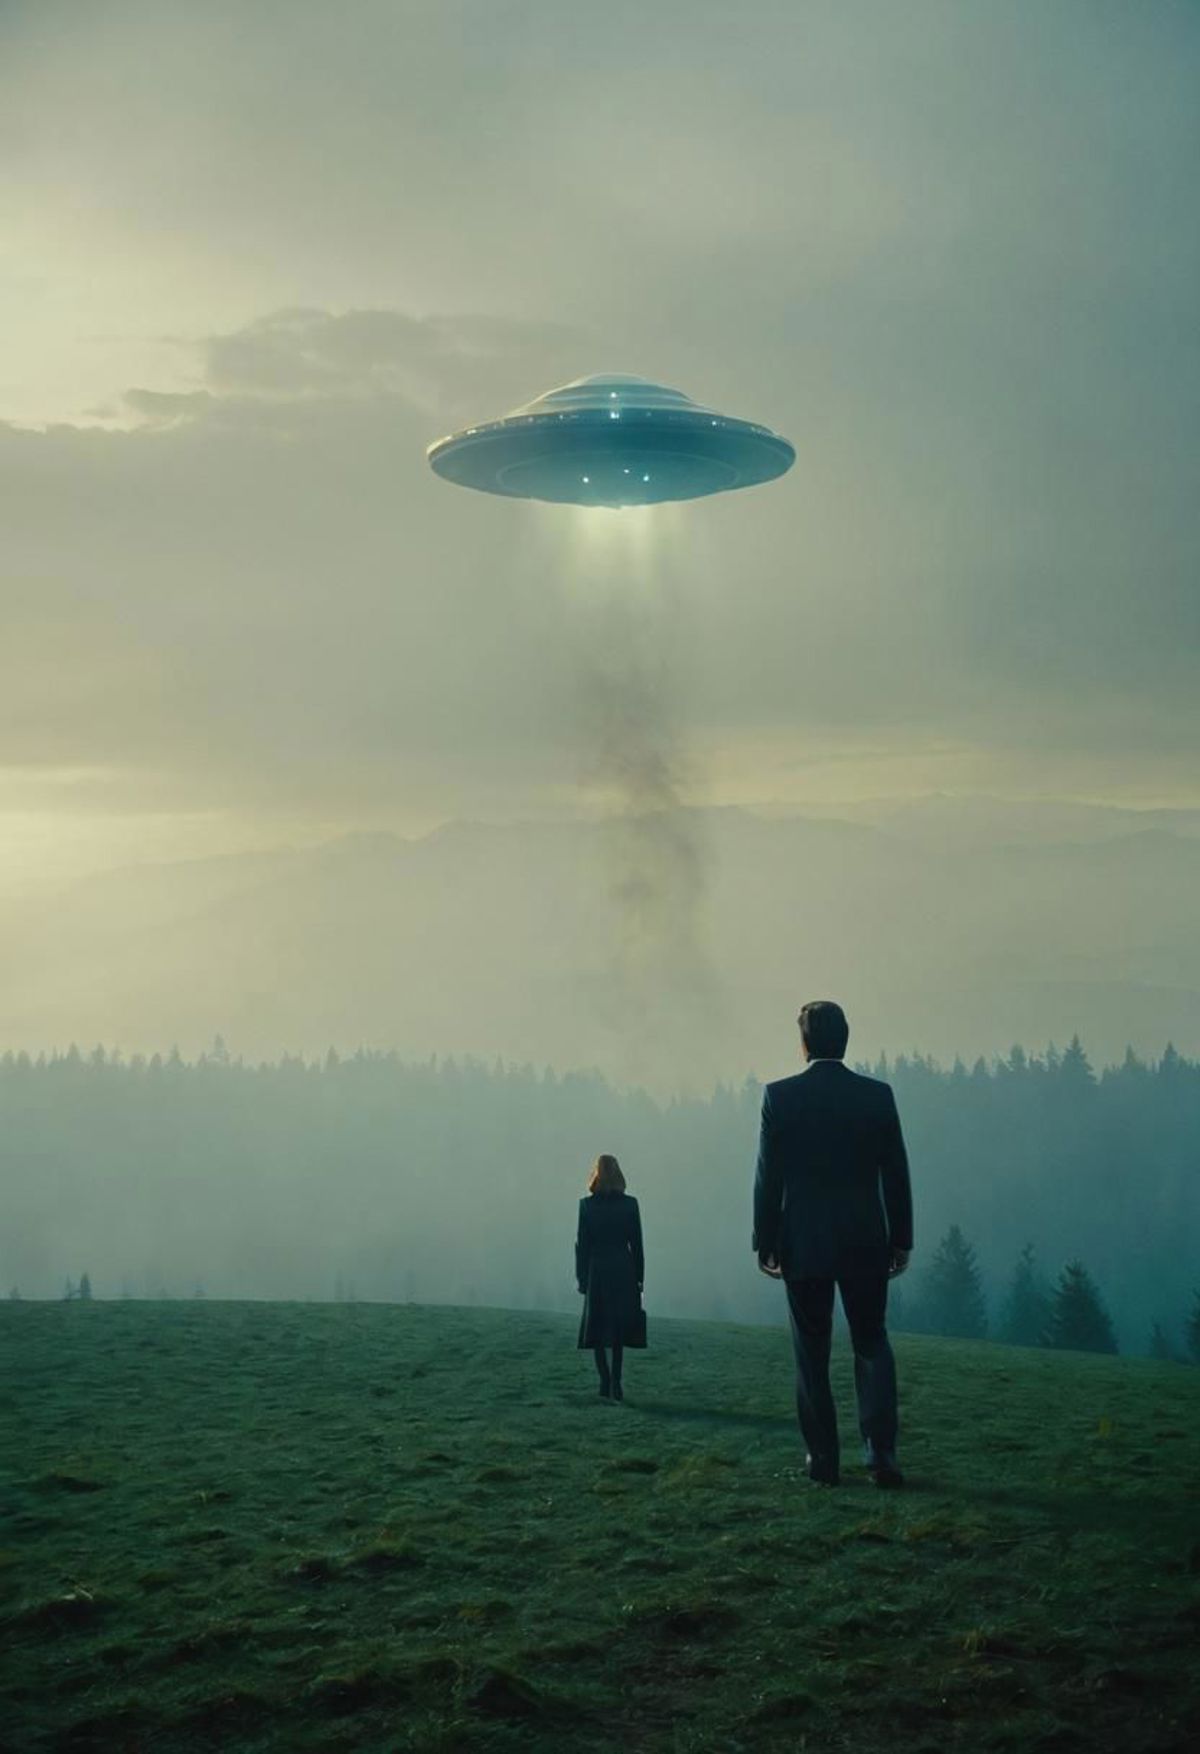 A man and a woman standing in a grassy field looking at a UFO in the sky.